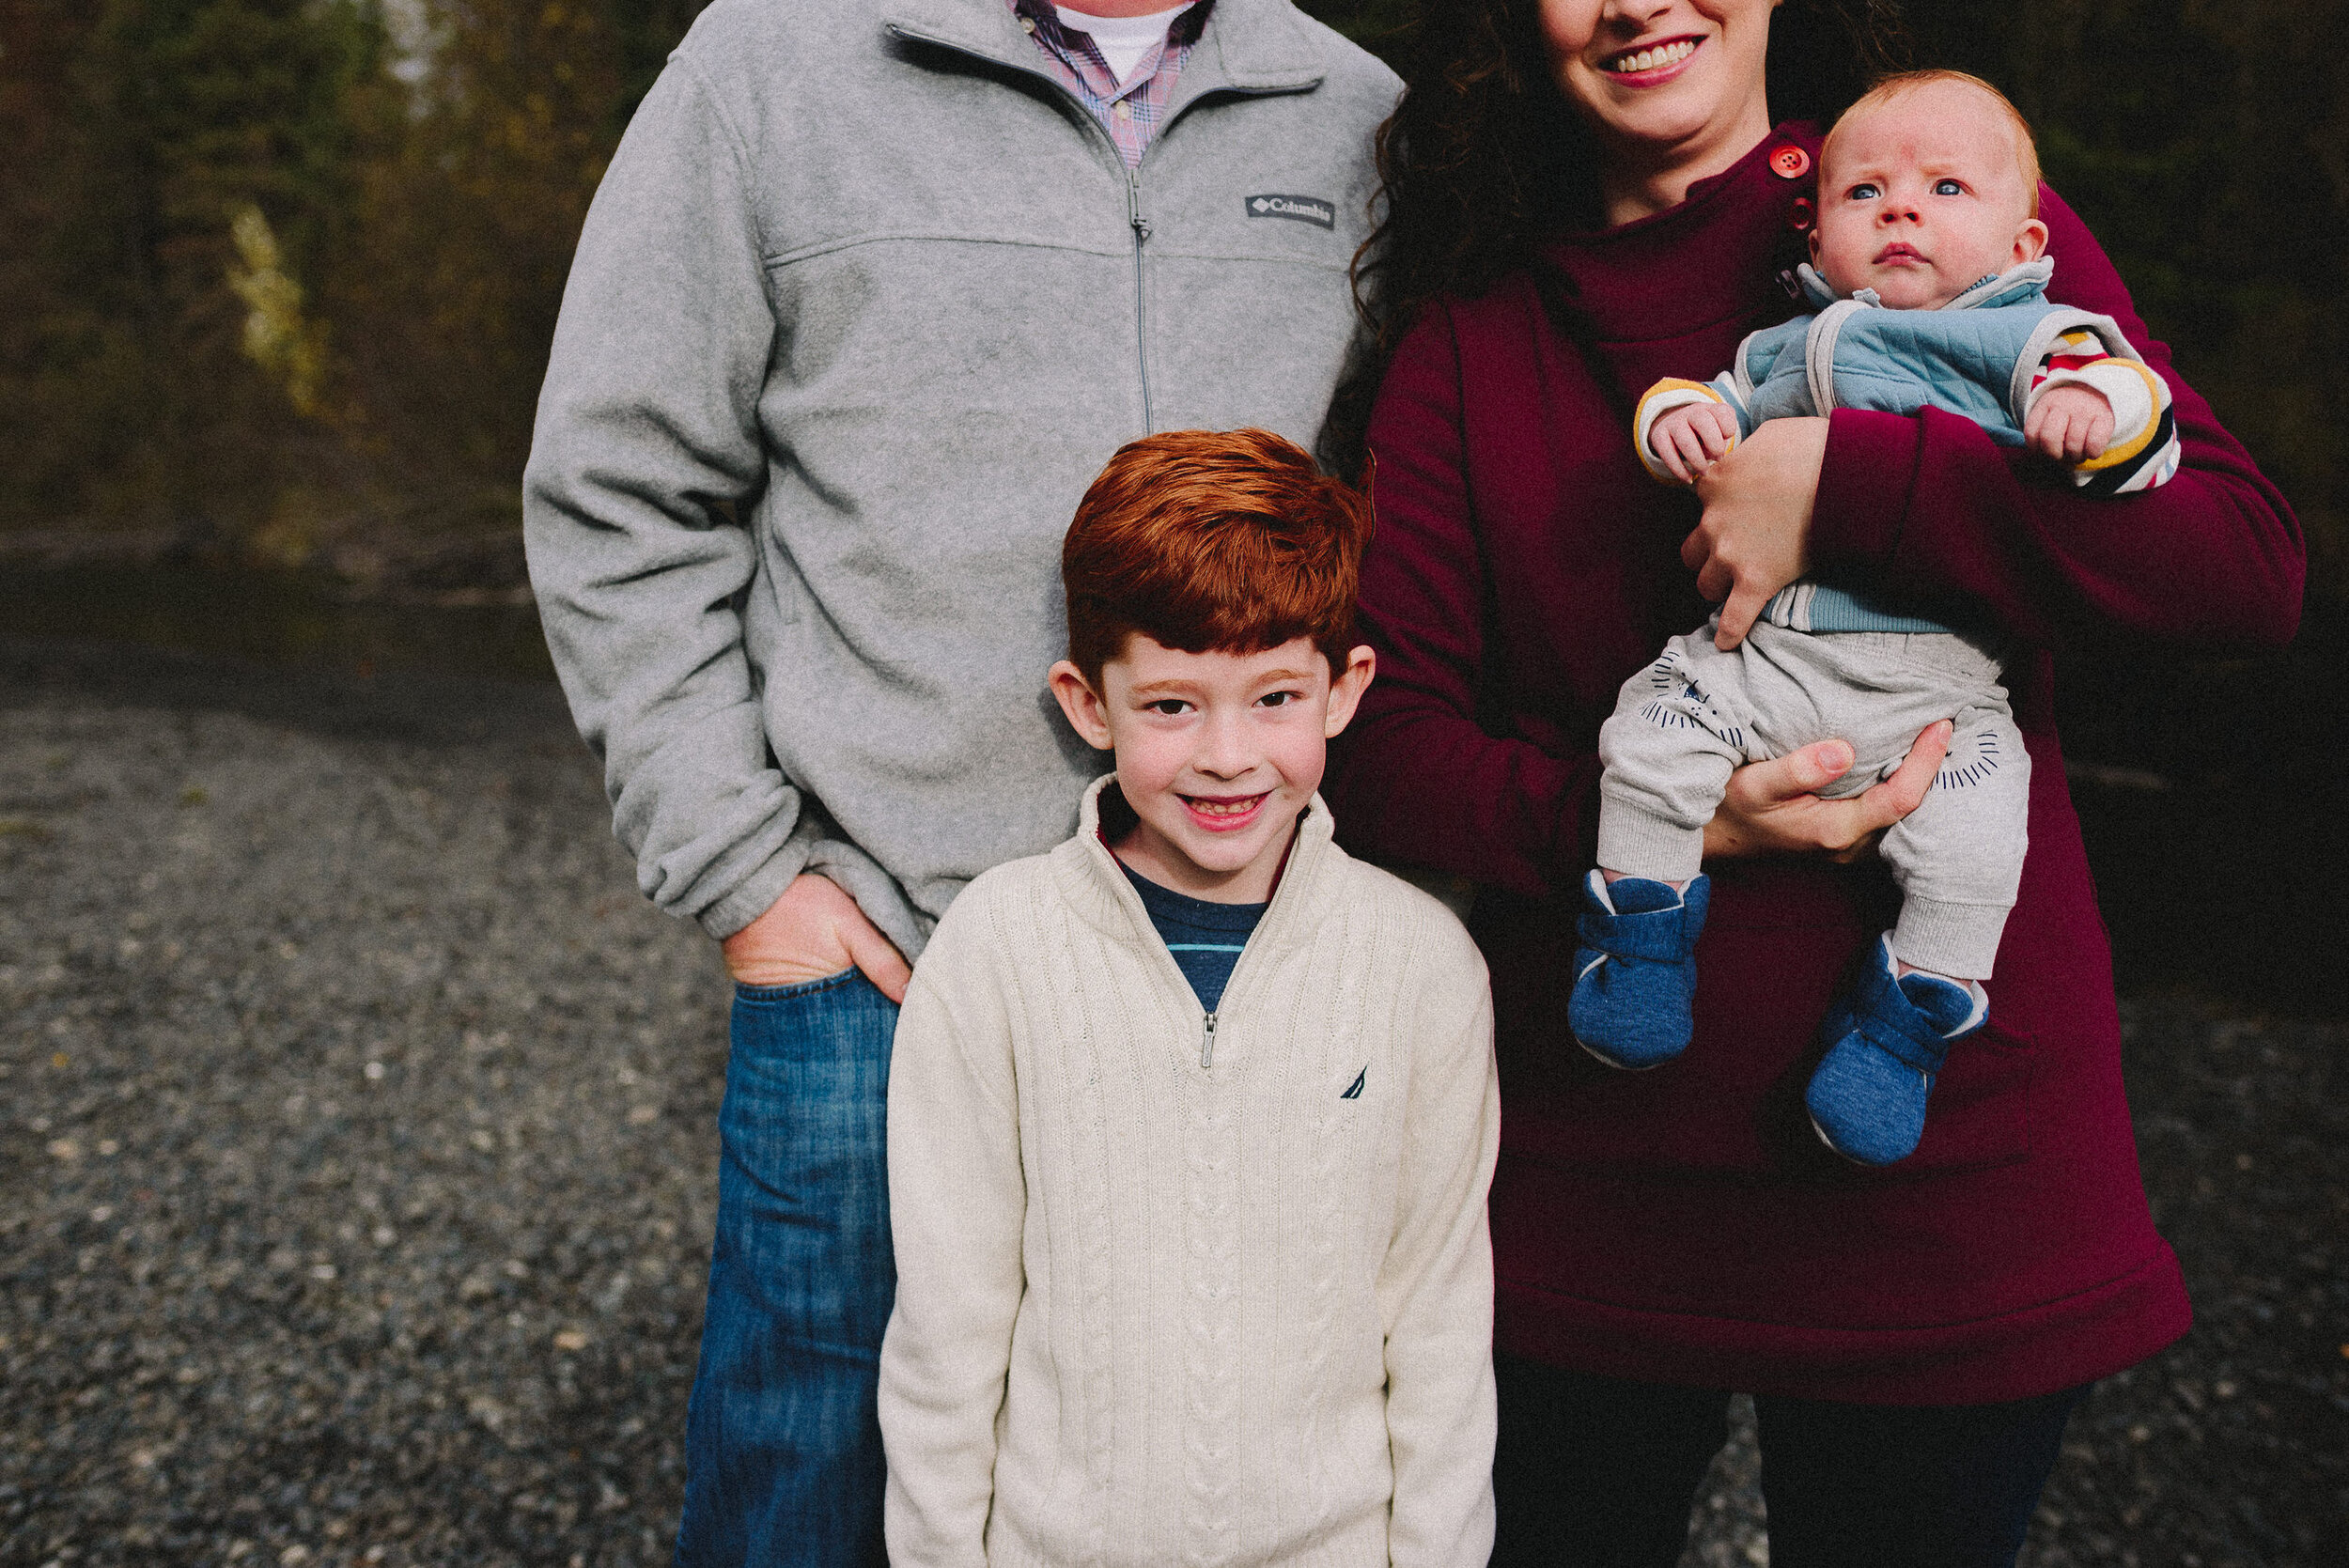 north-fork-eagle-river-fall-family-session-alaska-photographer-way-up-north-photography (22).jpg